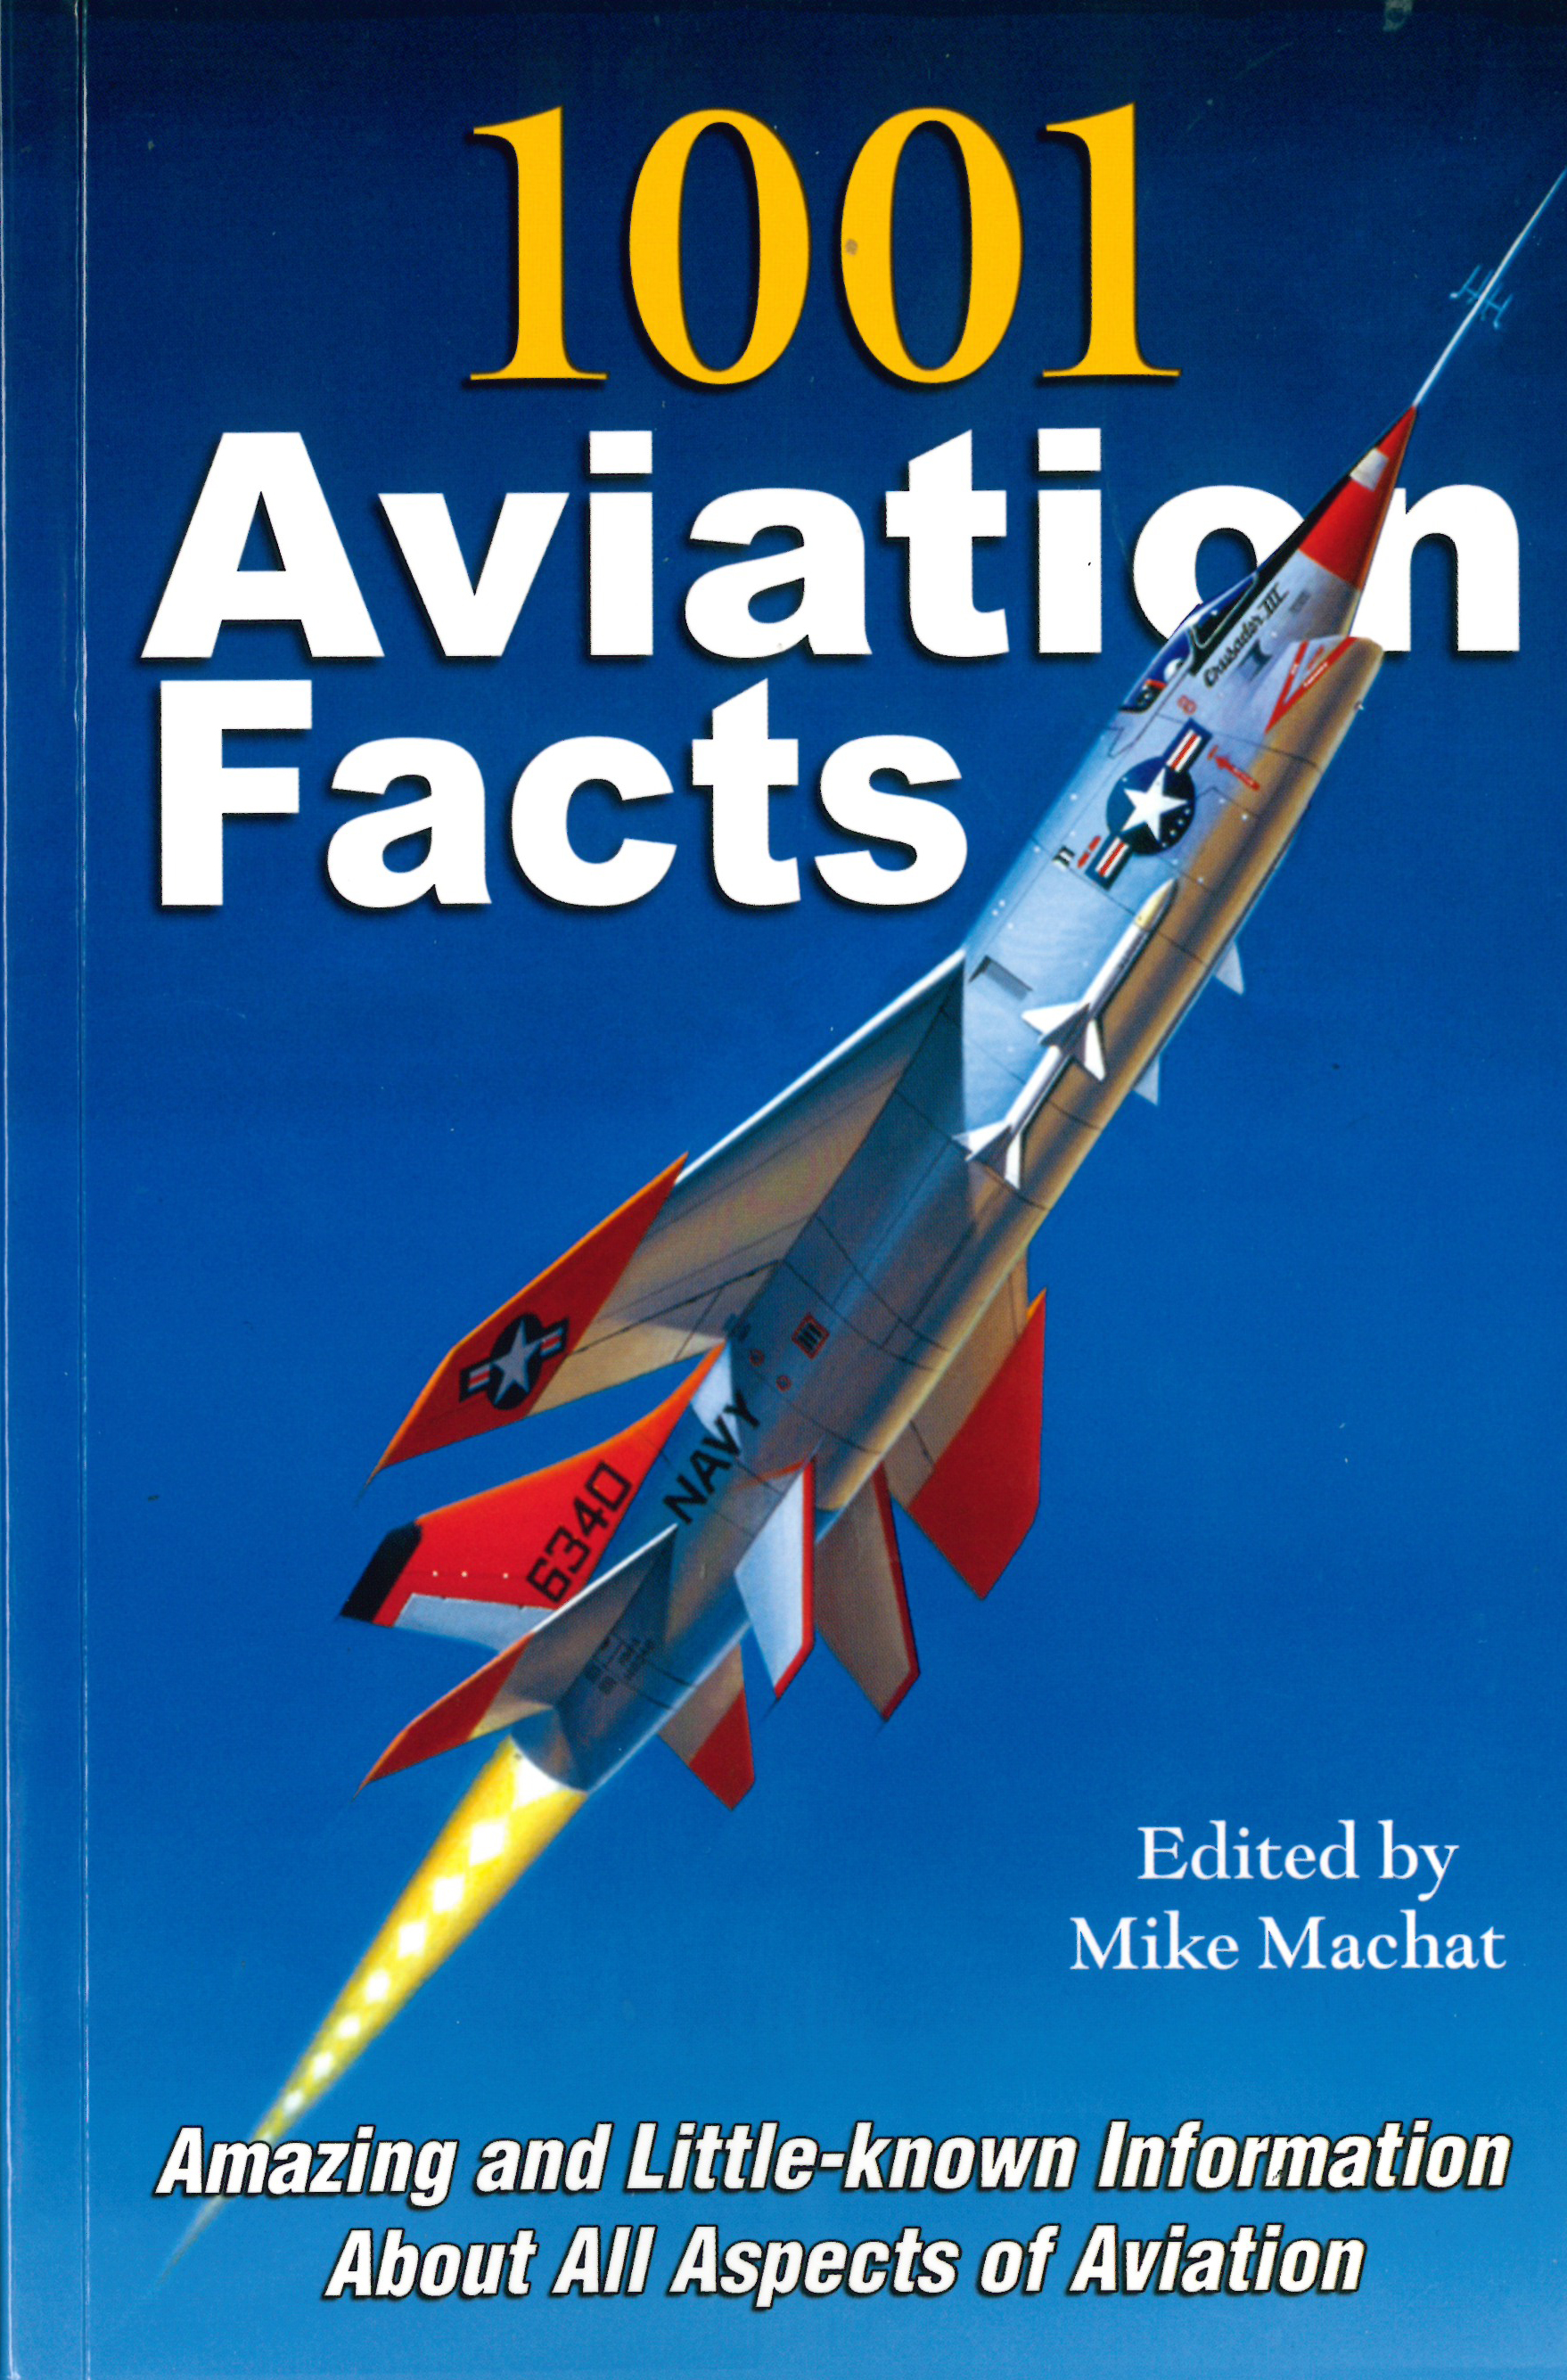 Aviation History | History of Flight | Aviation History Articles, Warbirds, Bombers, Trainers, Pilots | 1001 Aviation Facts — Become an Aviation Trivia King!